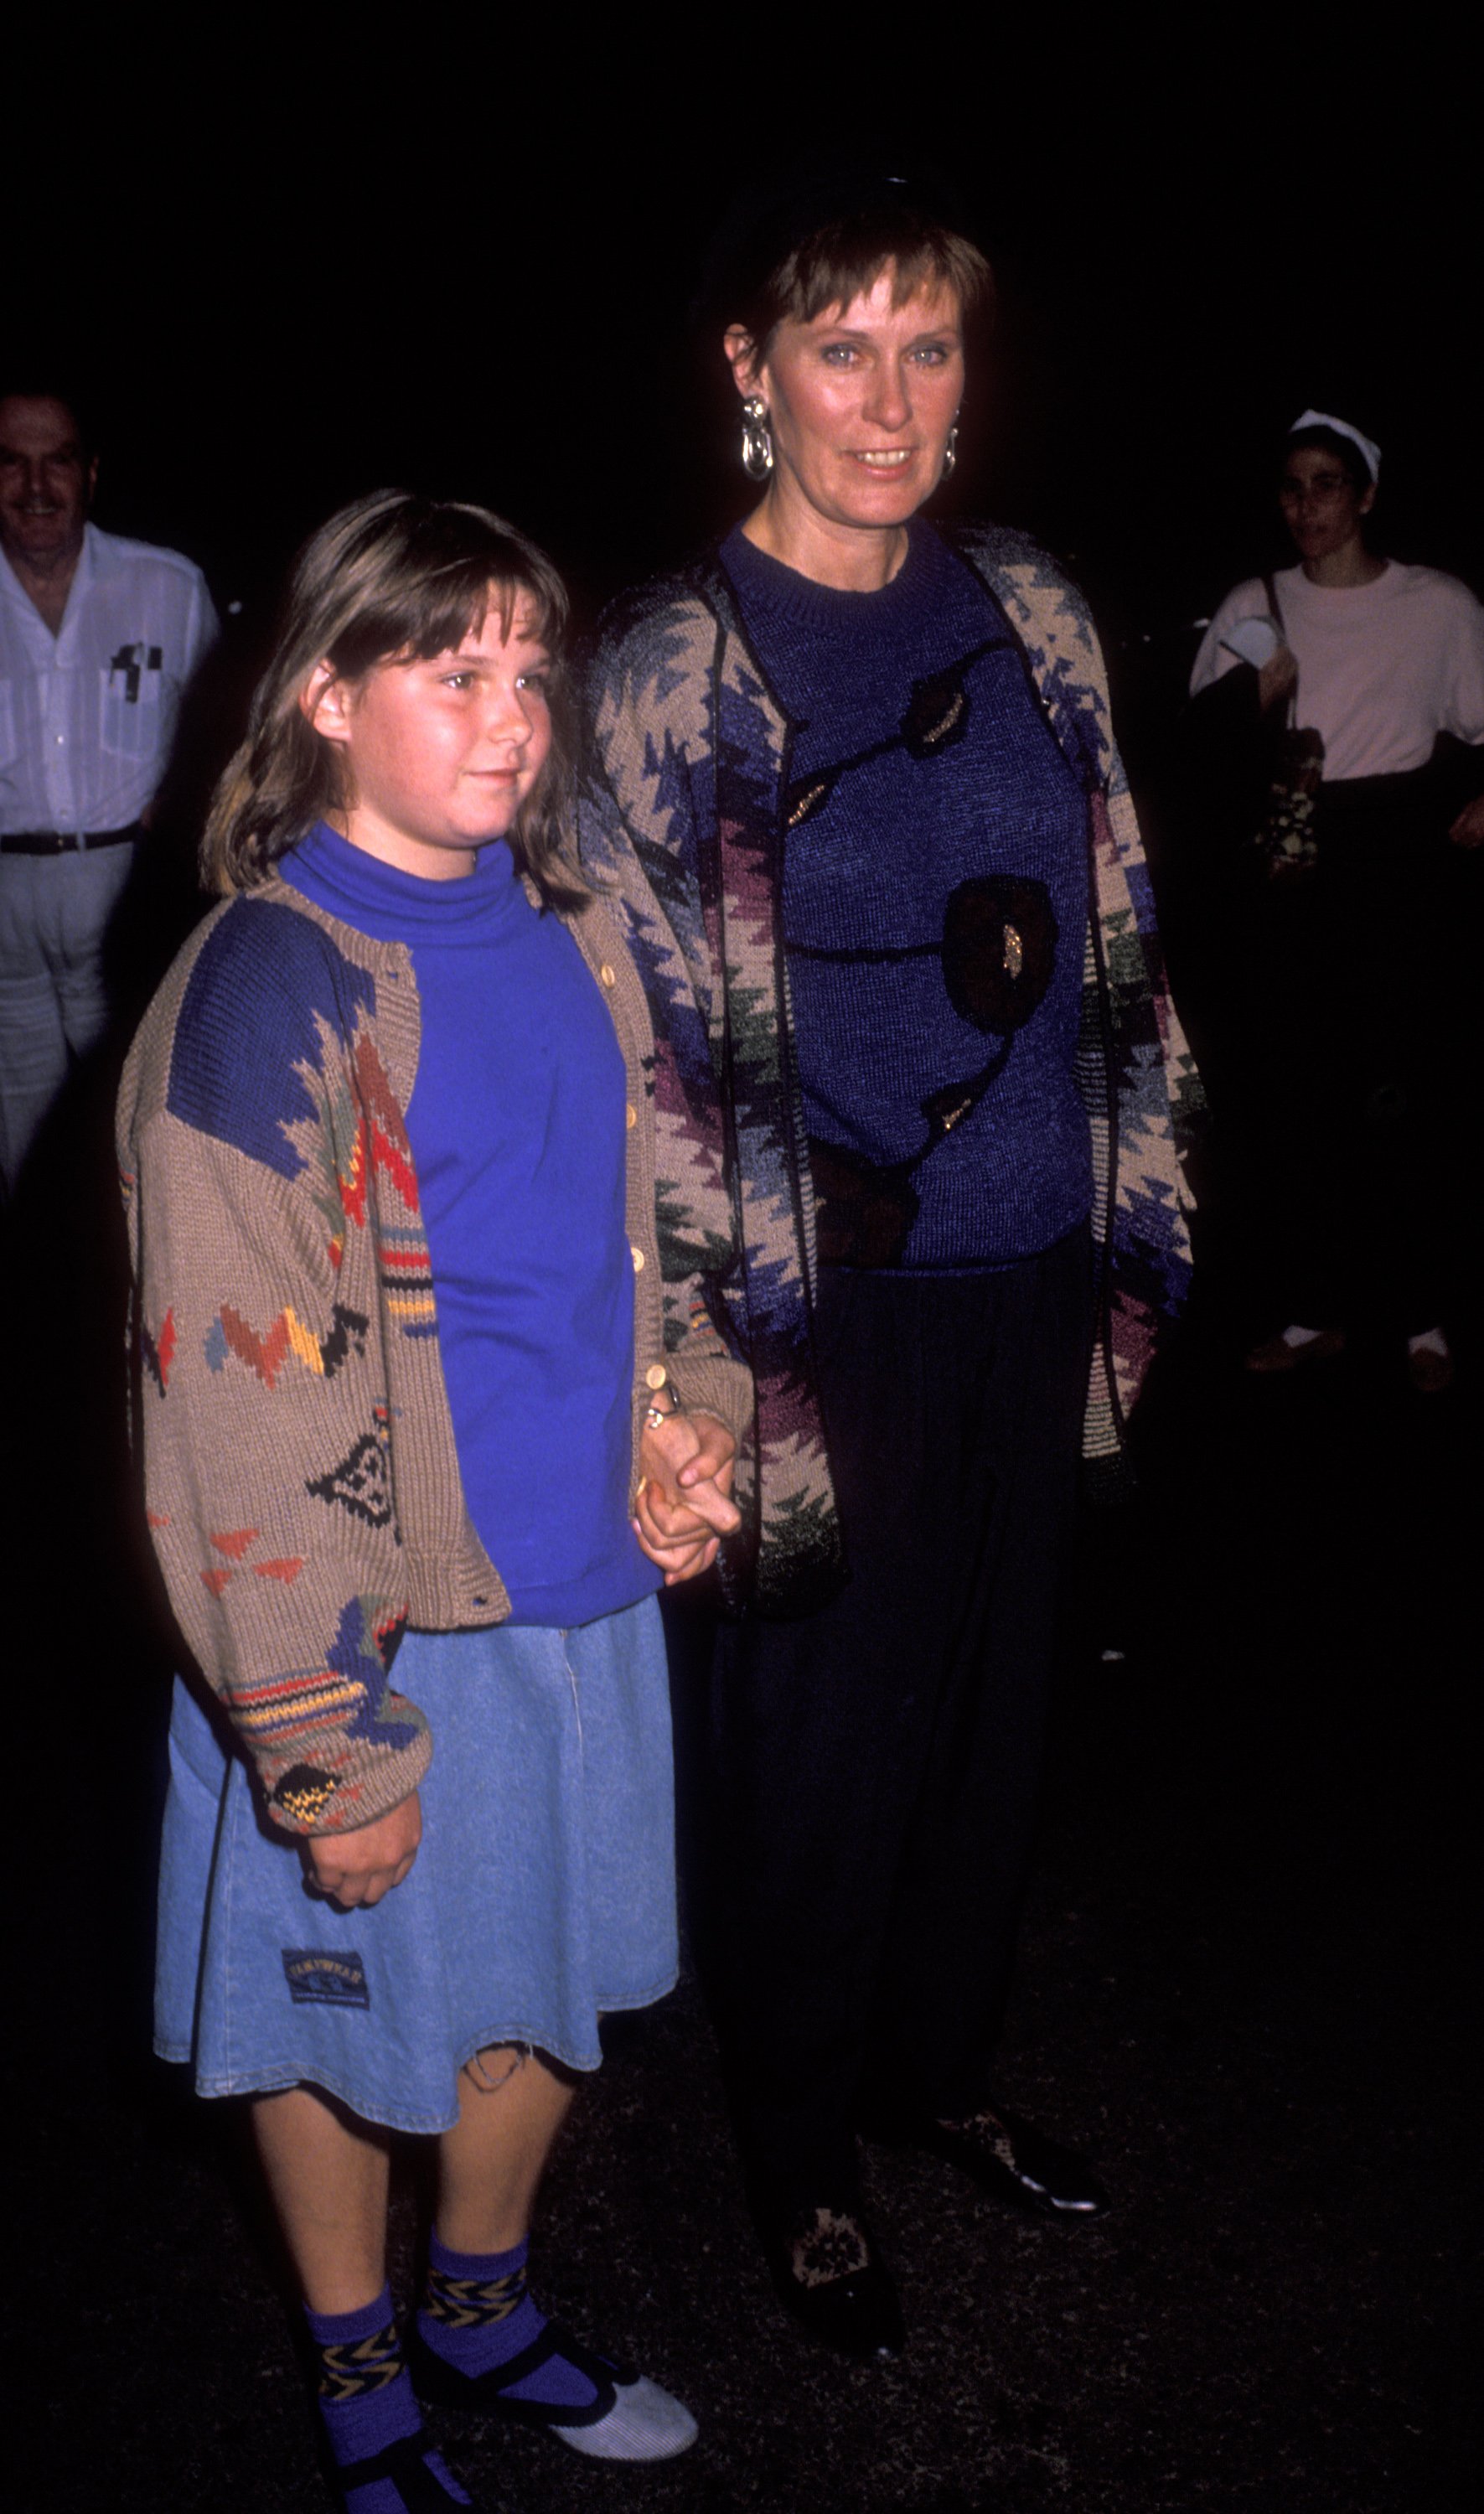  Actress Susan Clark and daughter, Katie, attend Pro-Choice Rally on November 12, 1989 at Rancho Park in Los Angeles, California | Source: Getty Images